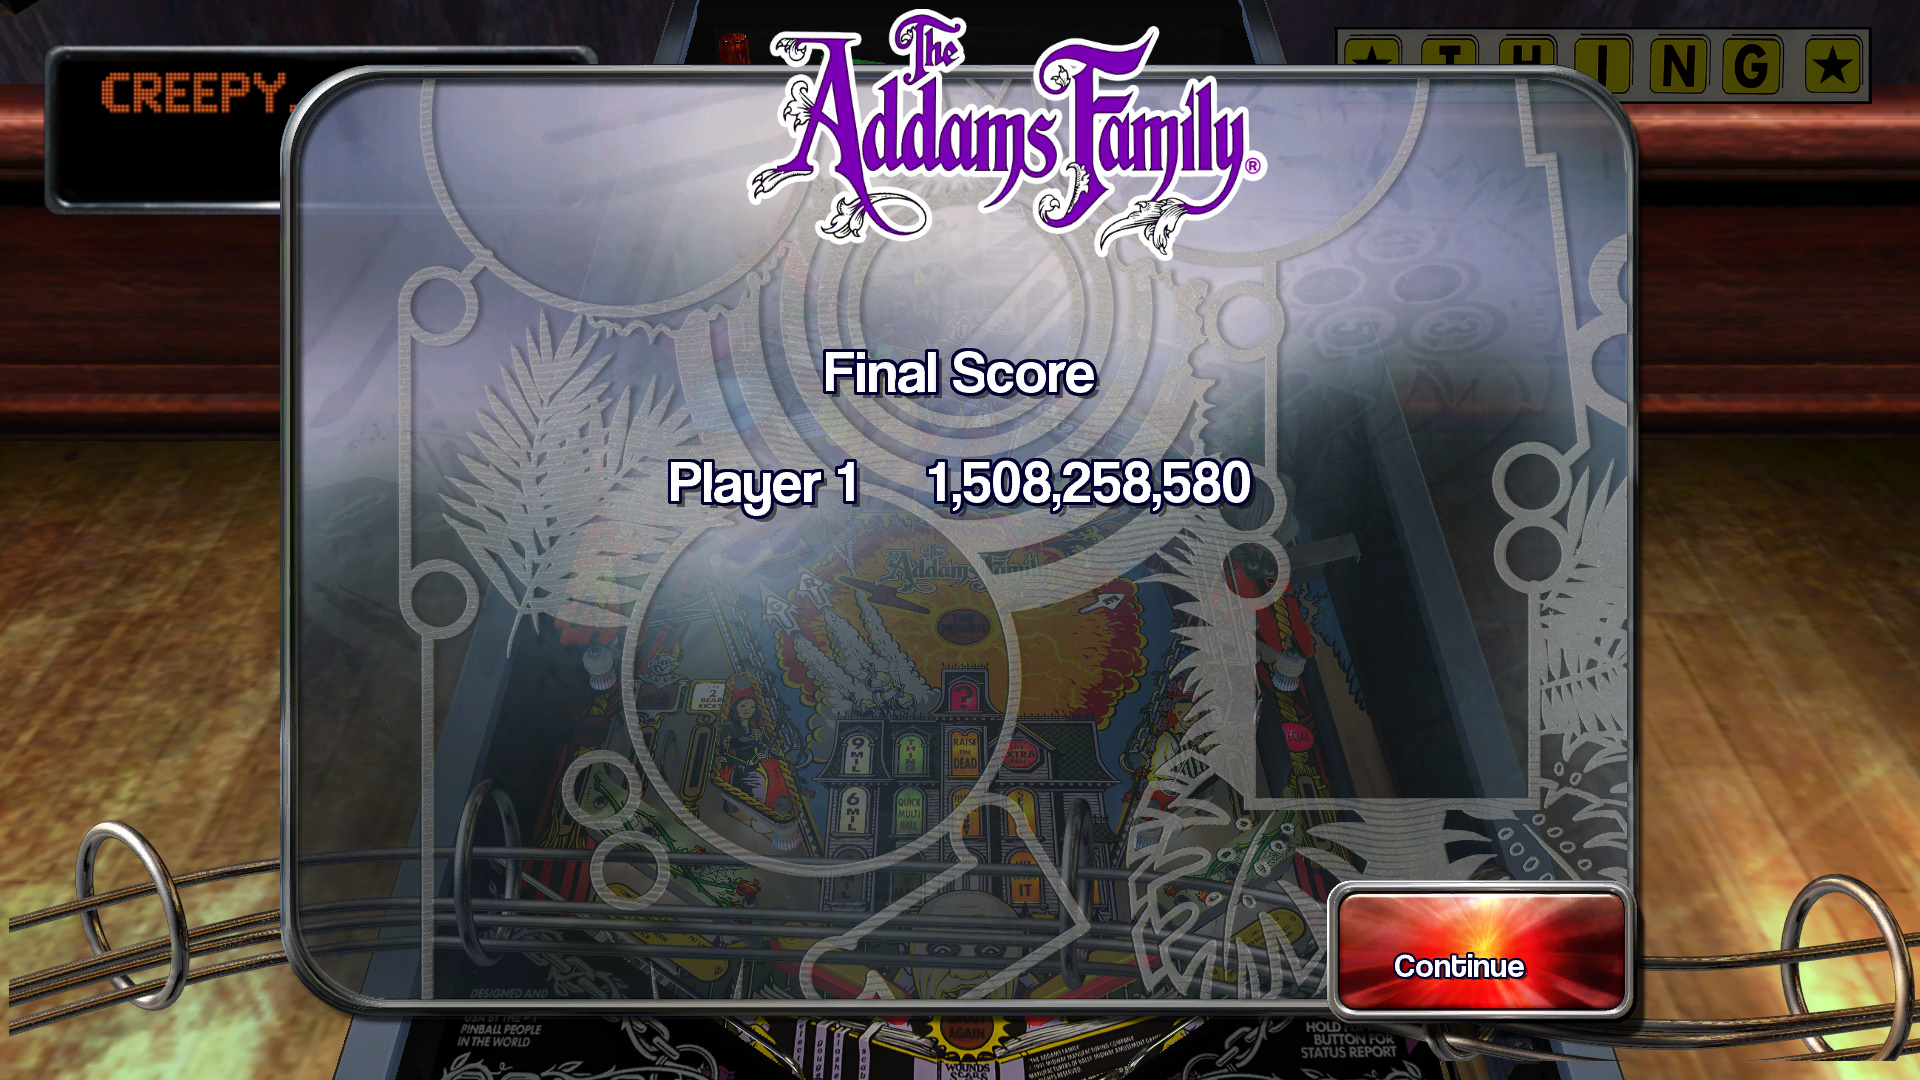 TheTrickster: Pinball Arcade: The Addams Family (PC) 1,508,258,580 points on 2015-11-12 17:13:05